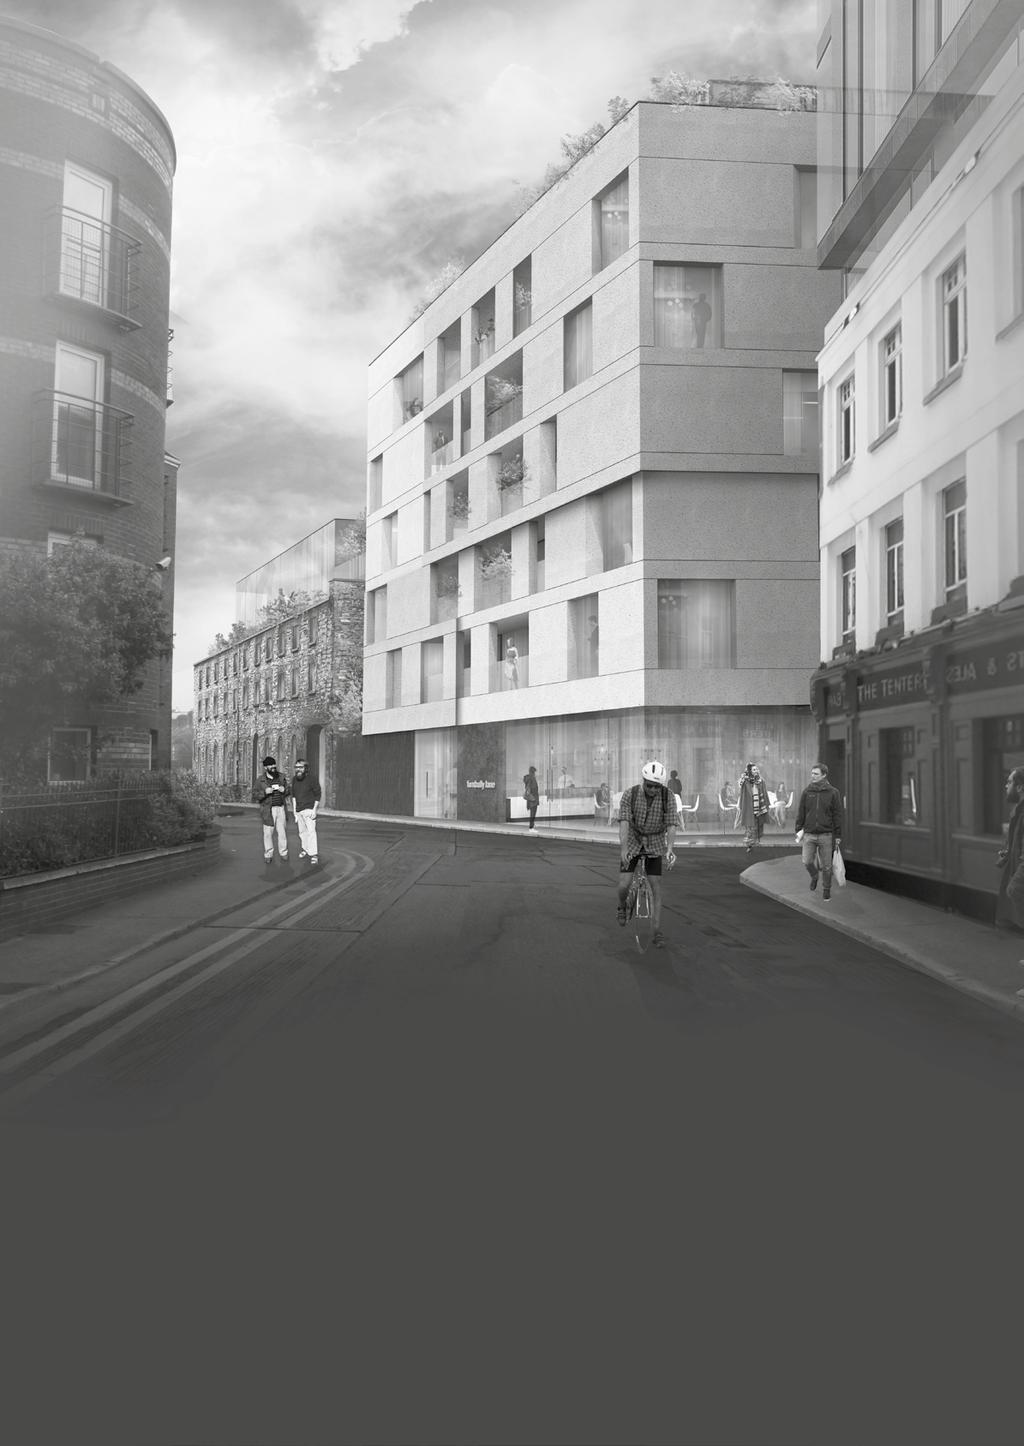 55 Fumbally DUBLIN 8 55 Fumbally DUBLIN 8 For Sale Prime Development Opportunity F.P.P. for 34 Apartments & 26,716 sq.